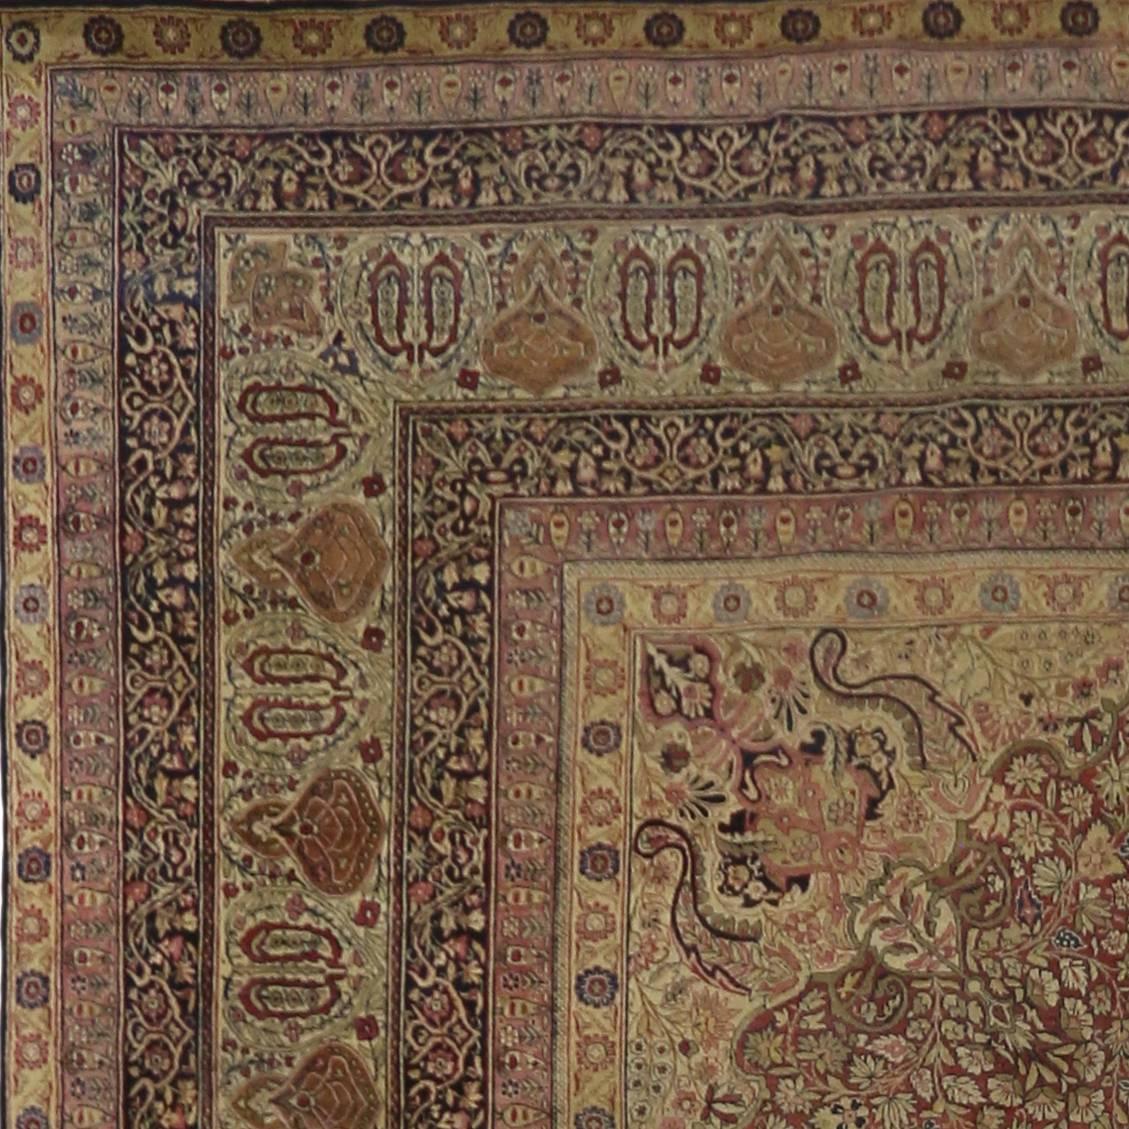 1880s Oversized Antique Persian Kermanshah Rug, Hotel Lobby Size Carpet In Good Condition For Sale In Dallas, TX